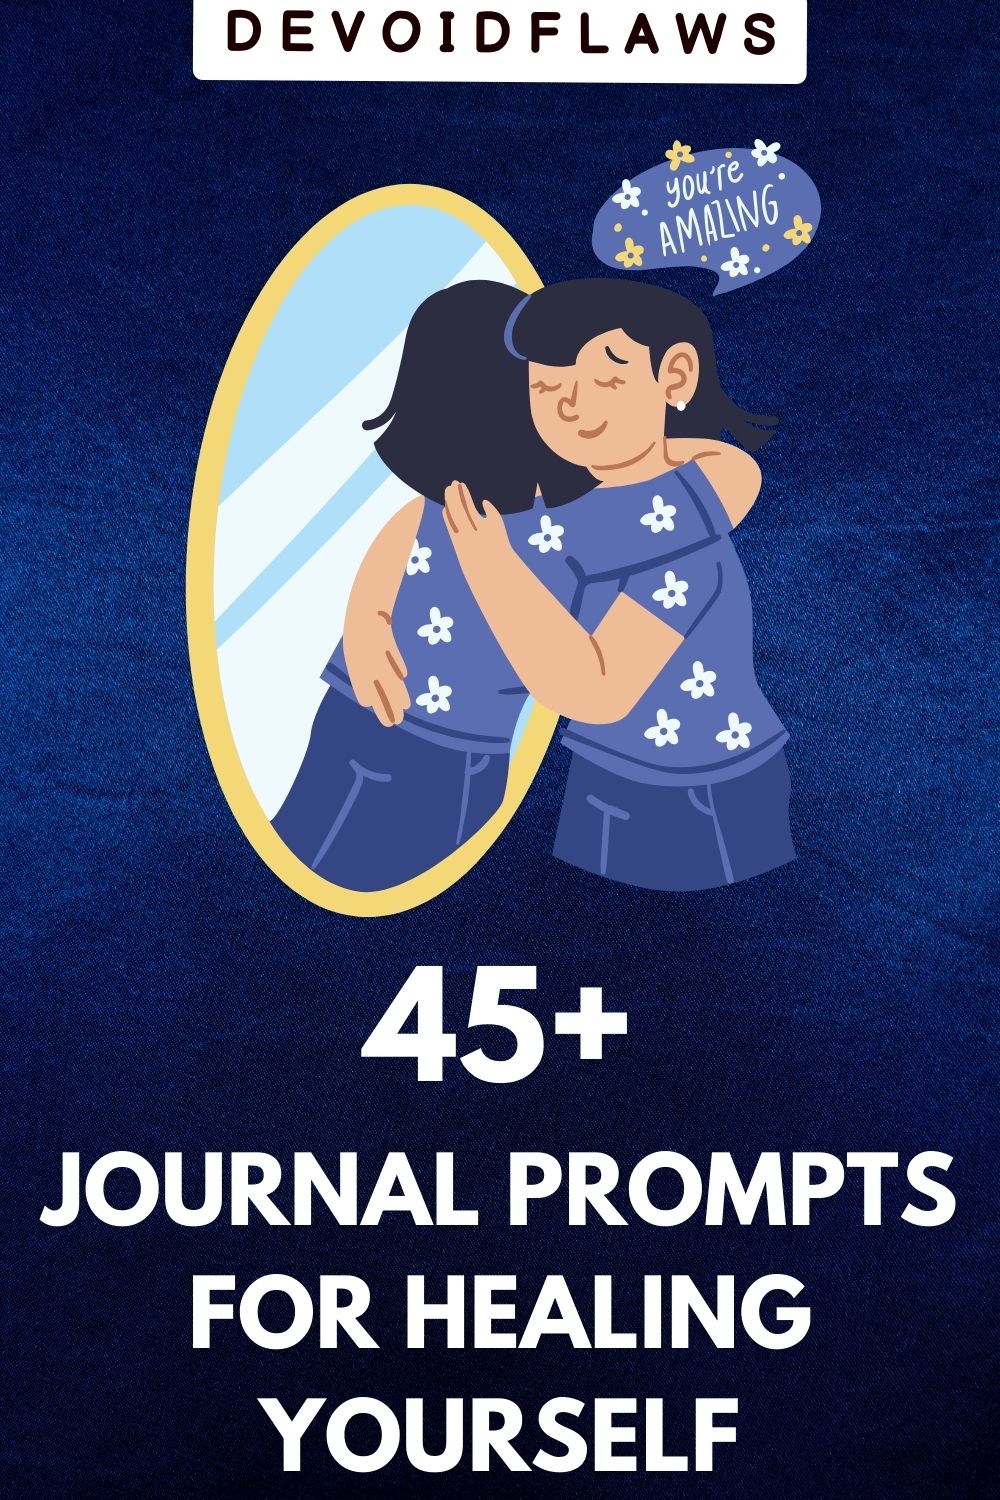 blue background image with text "45+ journal prompts for healing yourself"